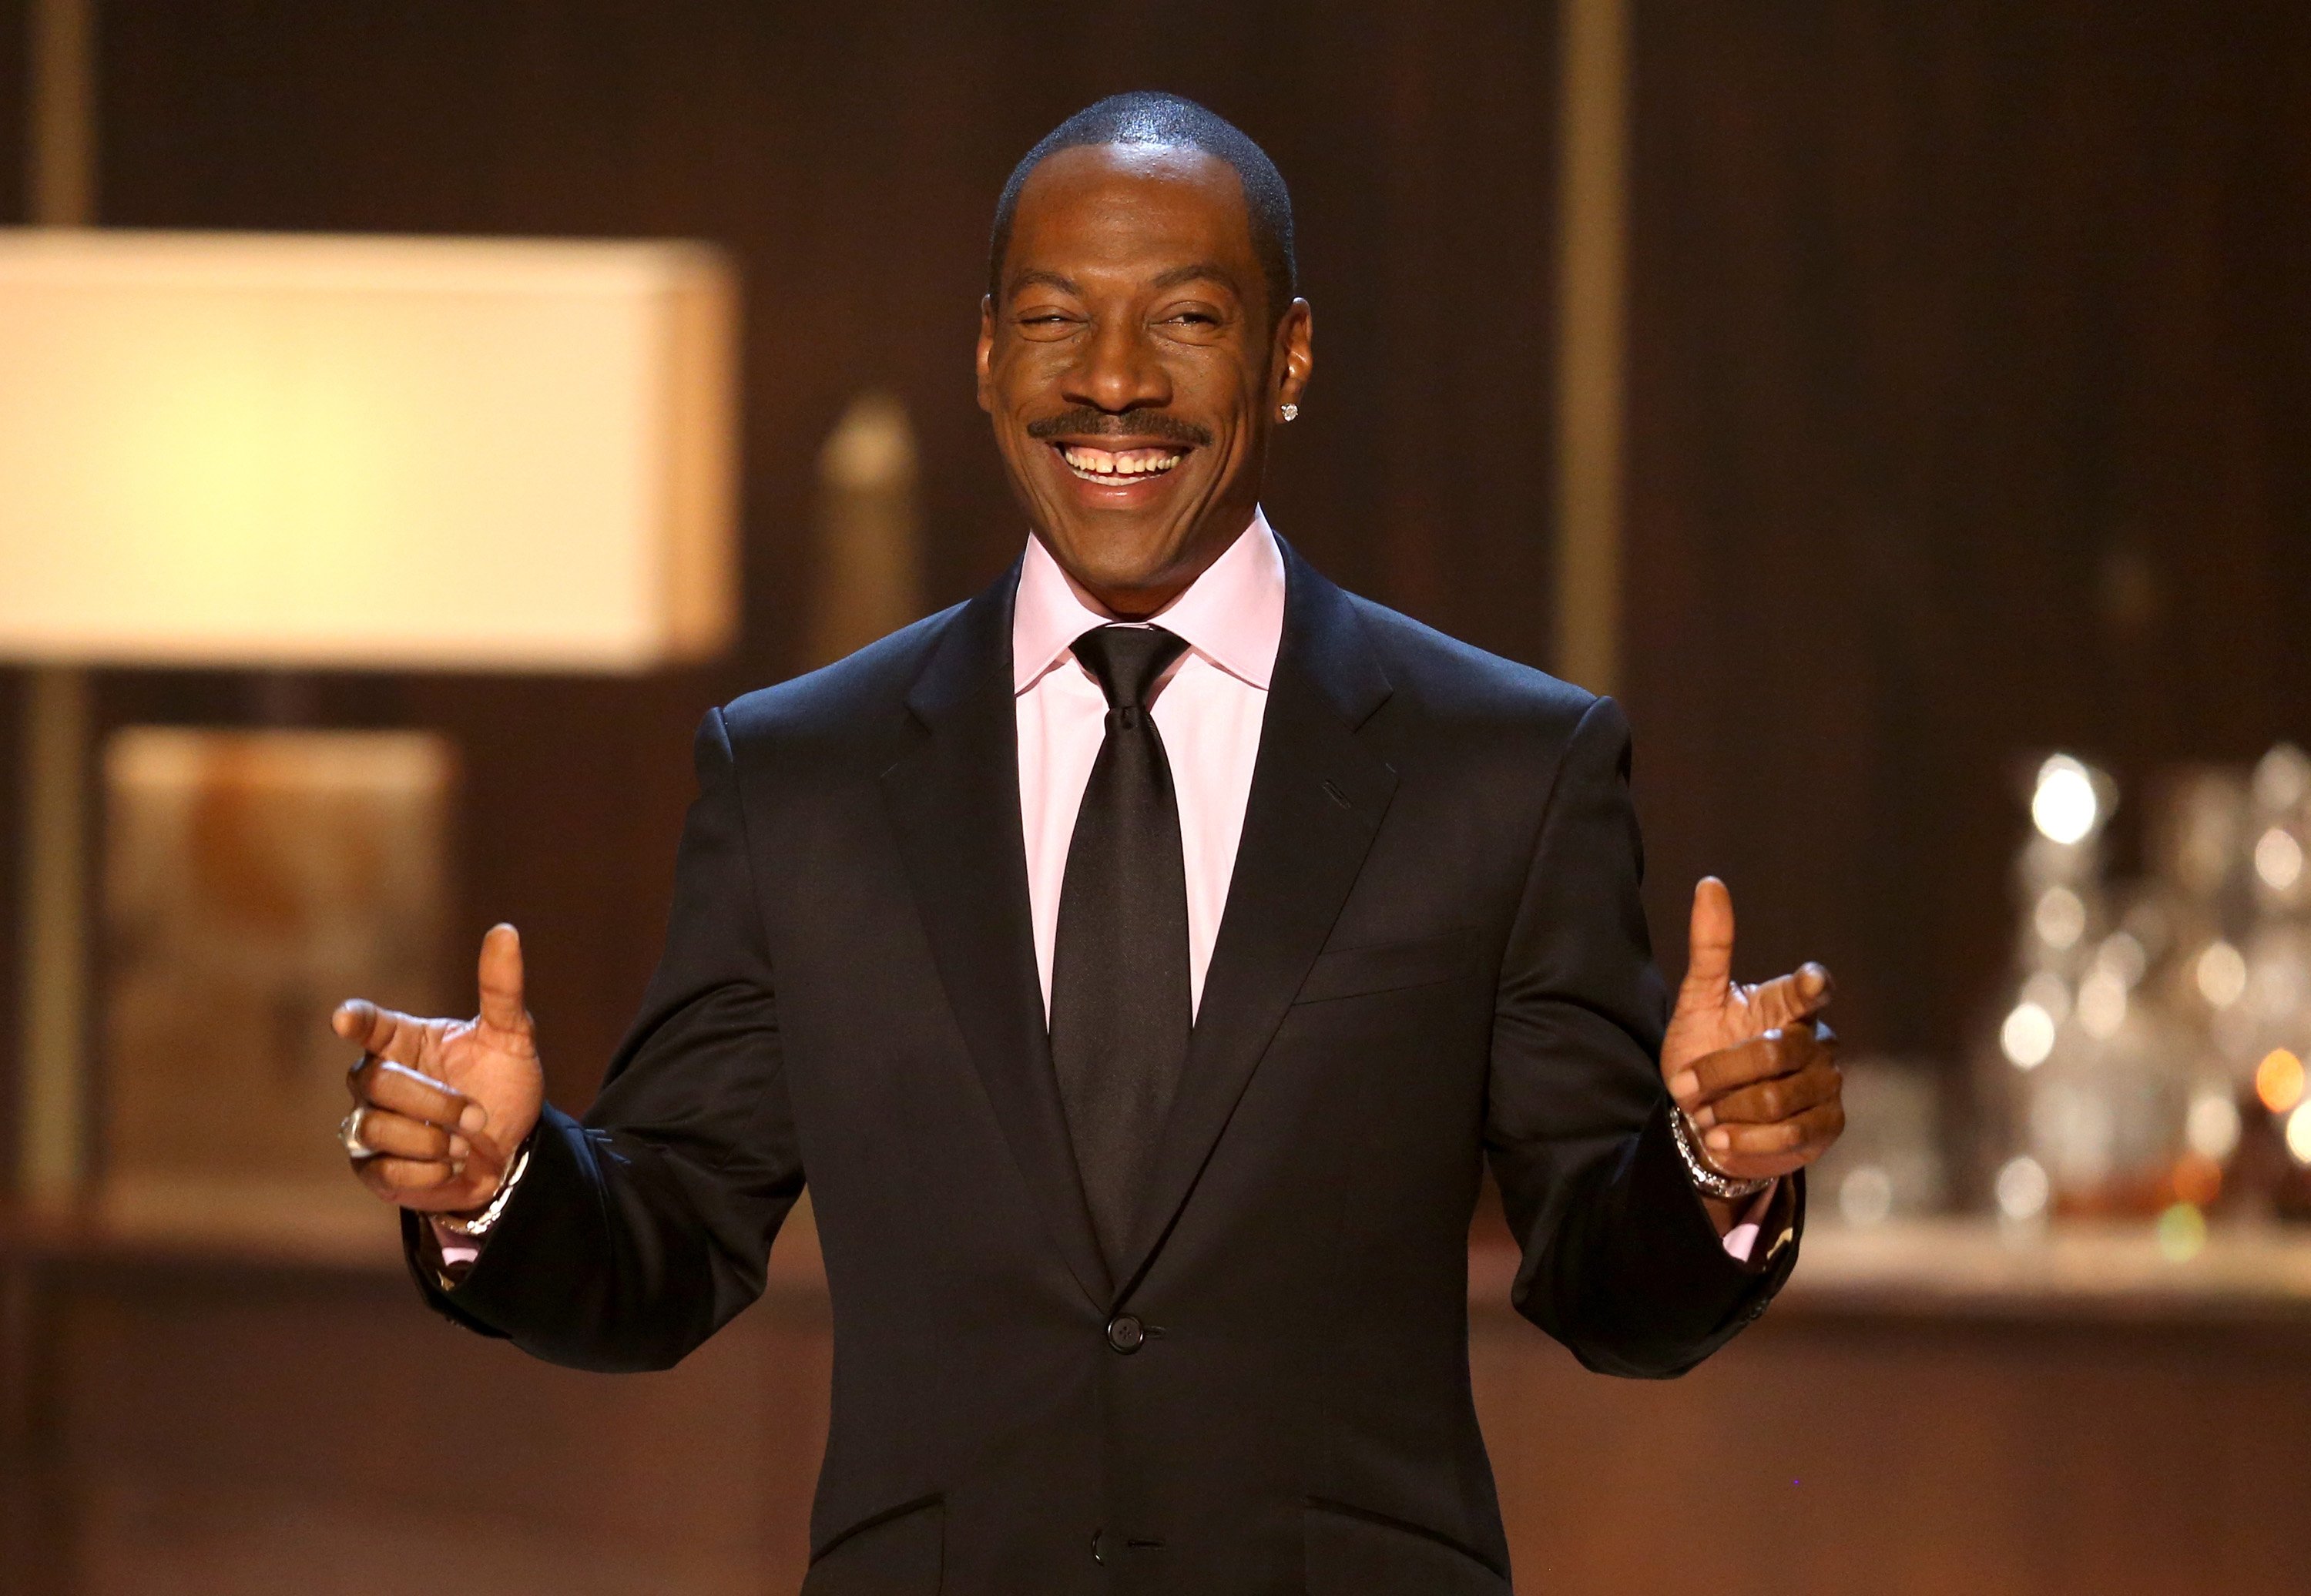 Honoree Eddie Murphy speaks onstage at Spike TV's "Eddie Murphy: One Night Only" at the Saban Theatre | Photo: Getty Images